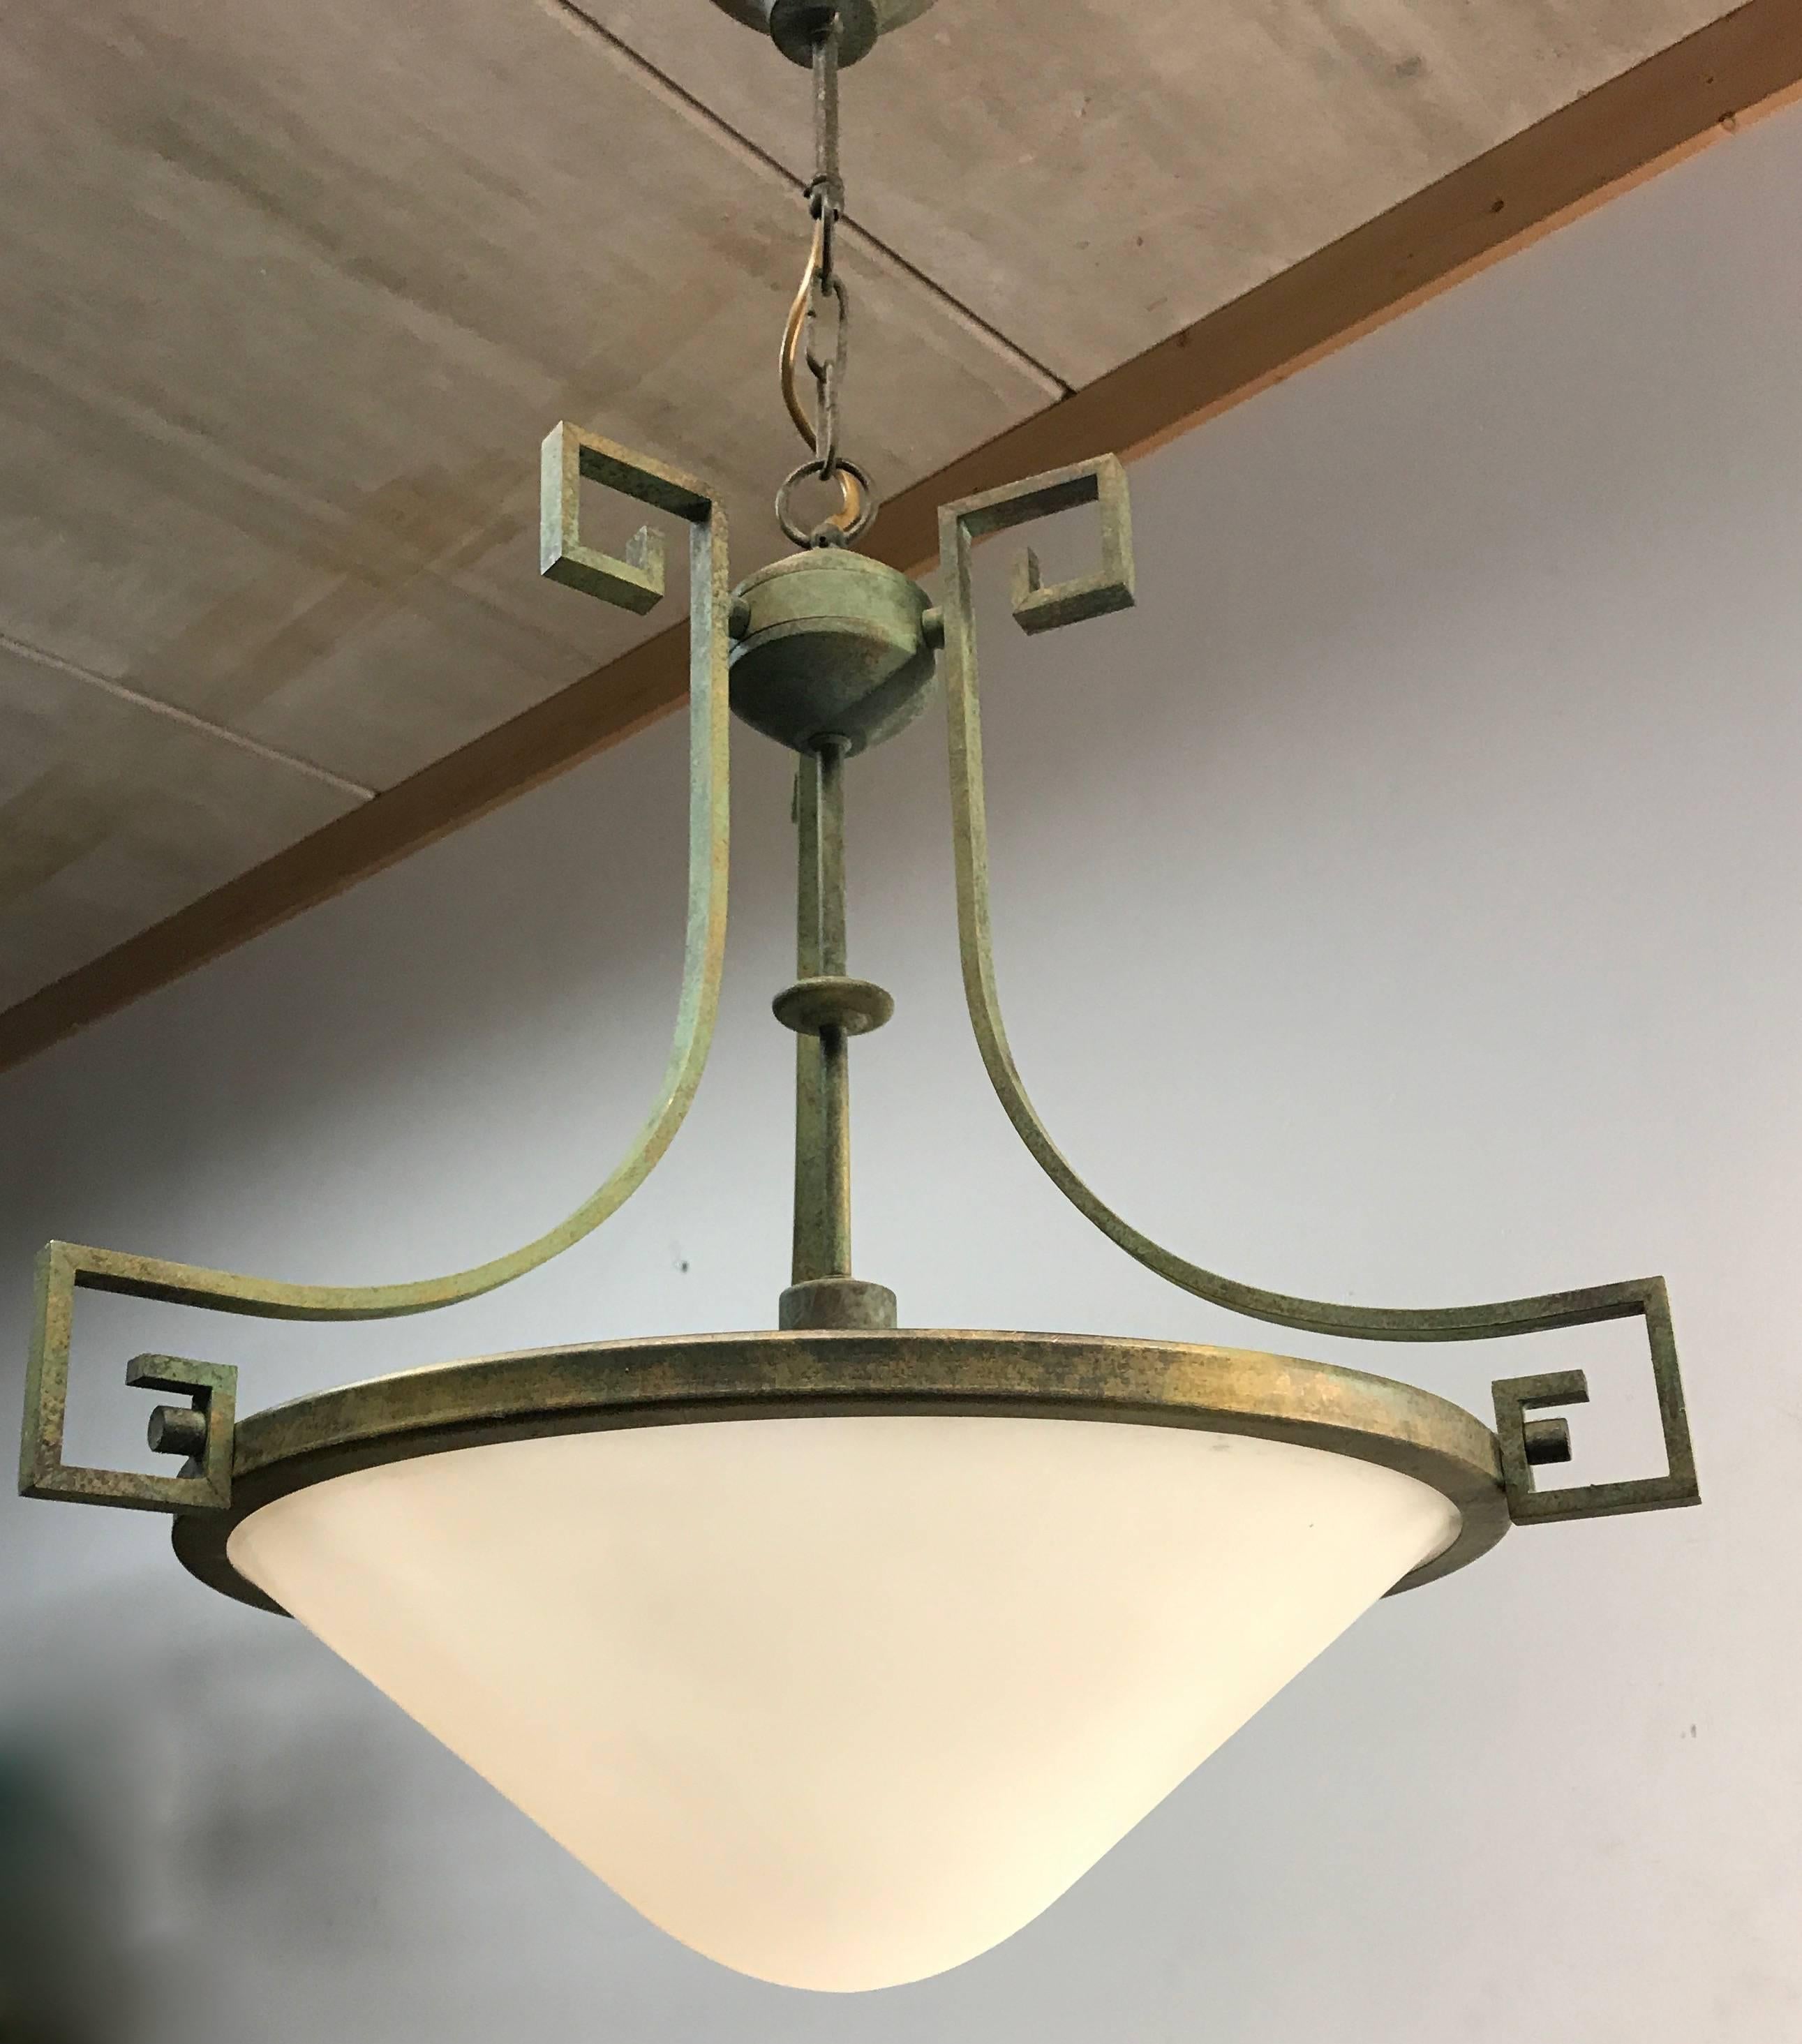 Great shape and color pendant.

This late 20th century, bronze patinated brass pendant comes with a matching brass chain and ceiling cap. All the brass is green bronze patinated which gives it its extra stylish and classical look and feel. The